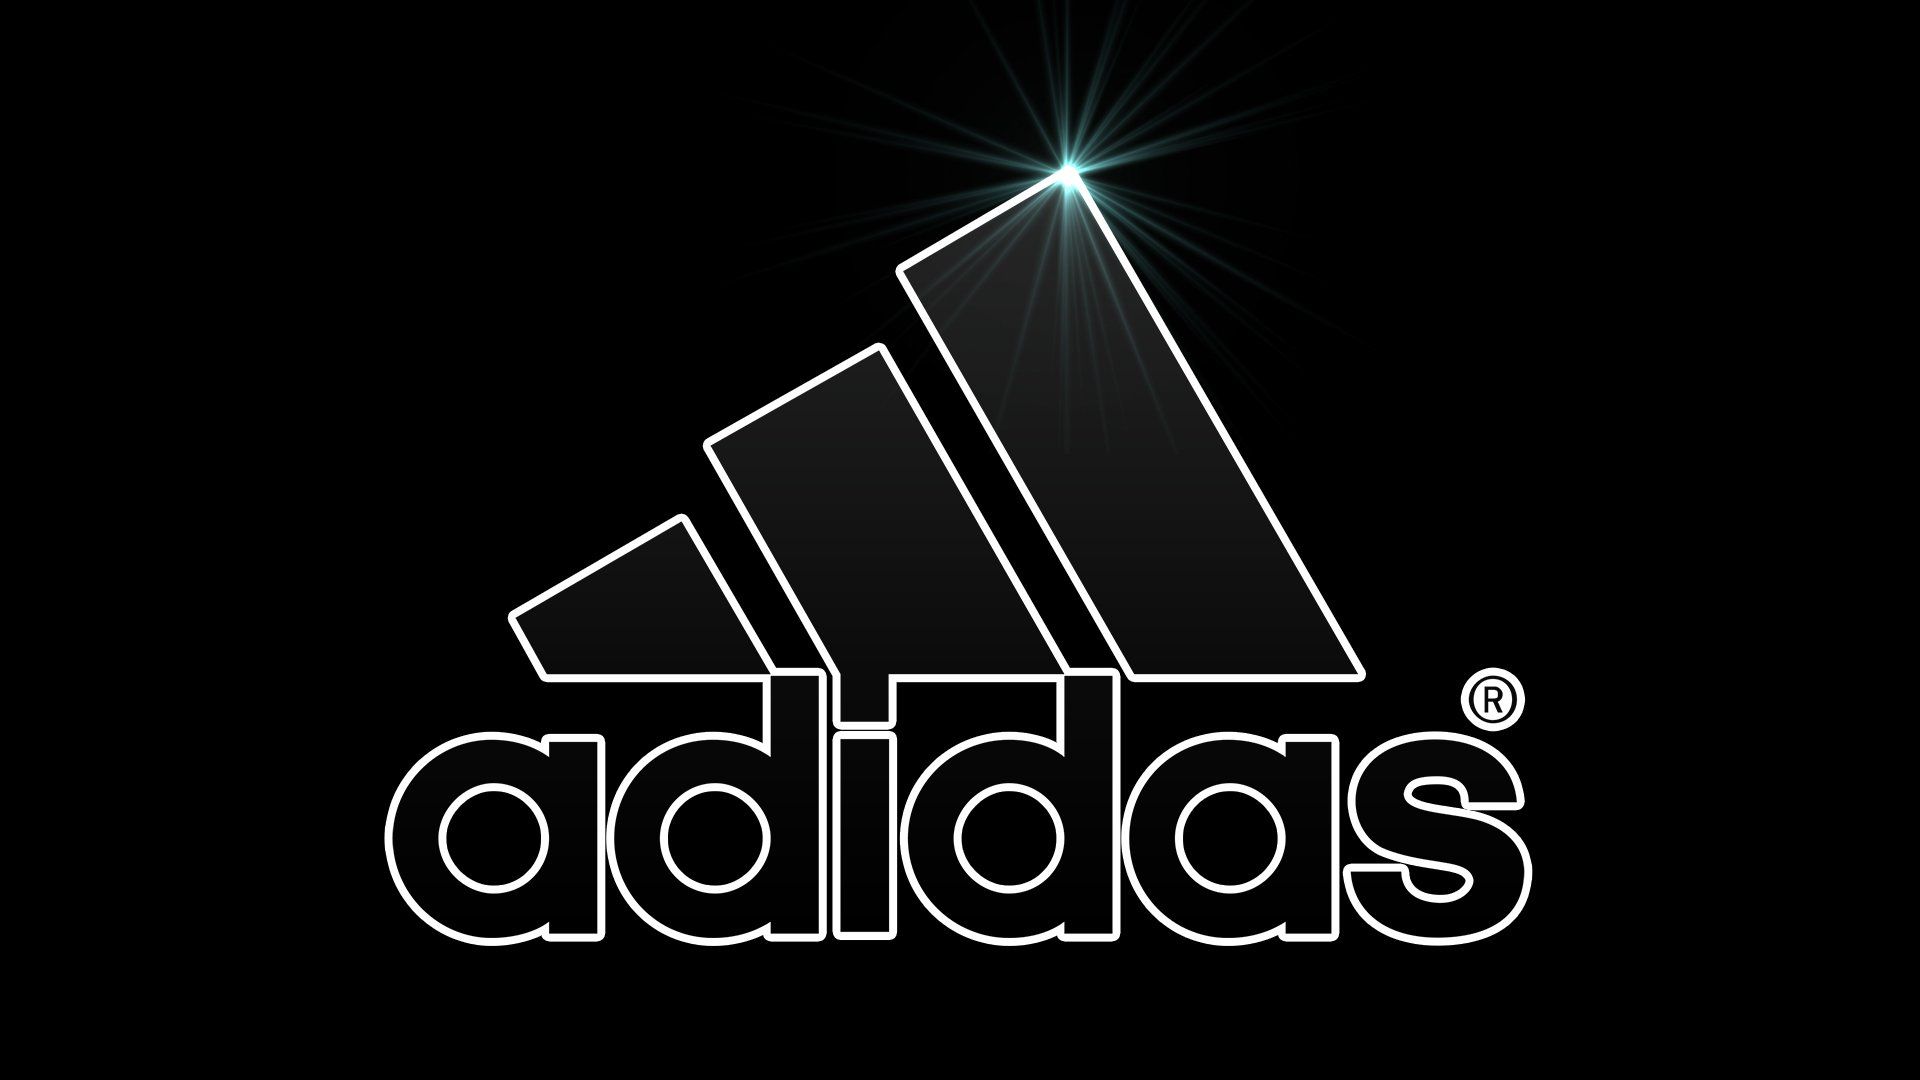 Red And Black Adidas Logo Wallpapers